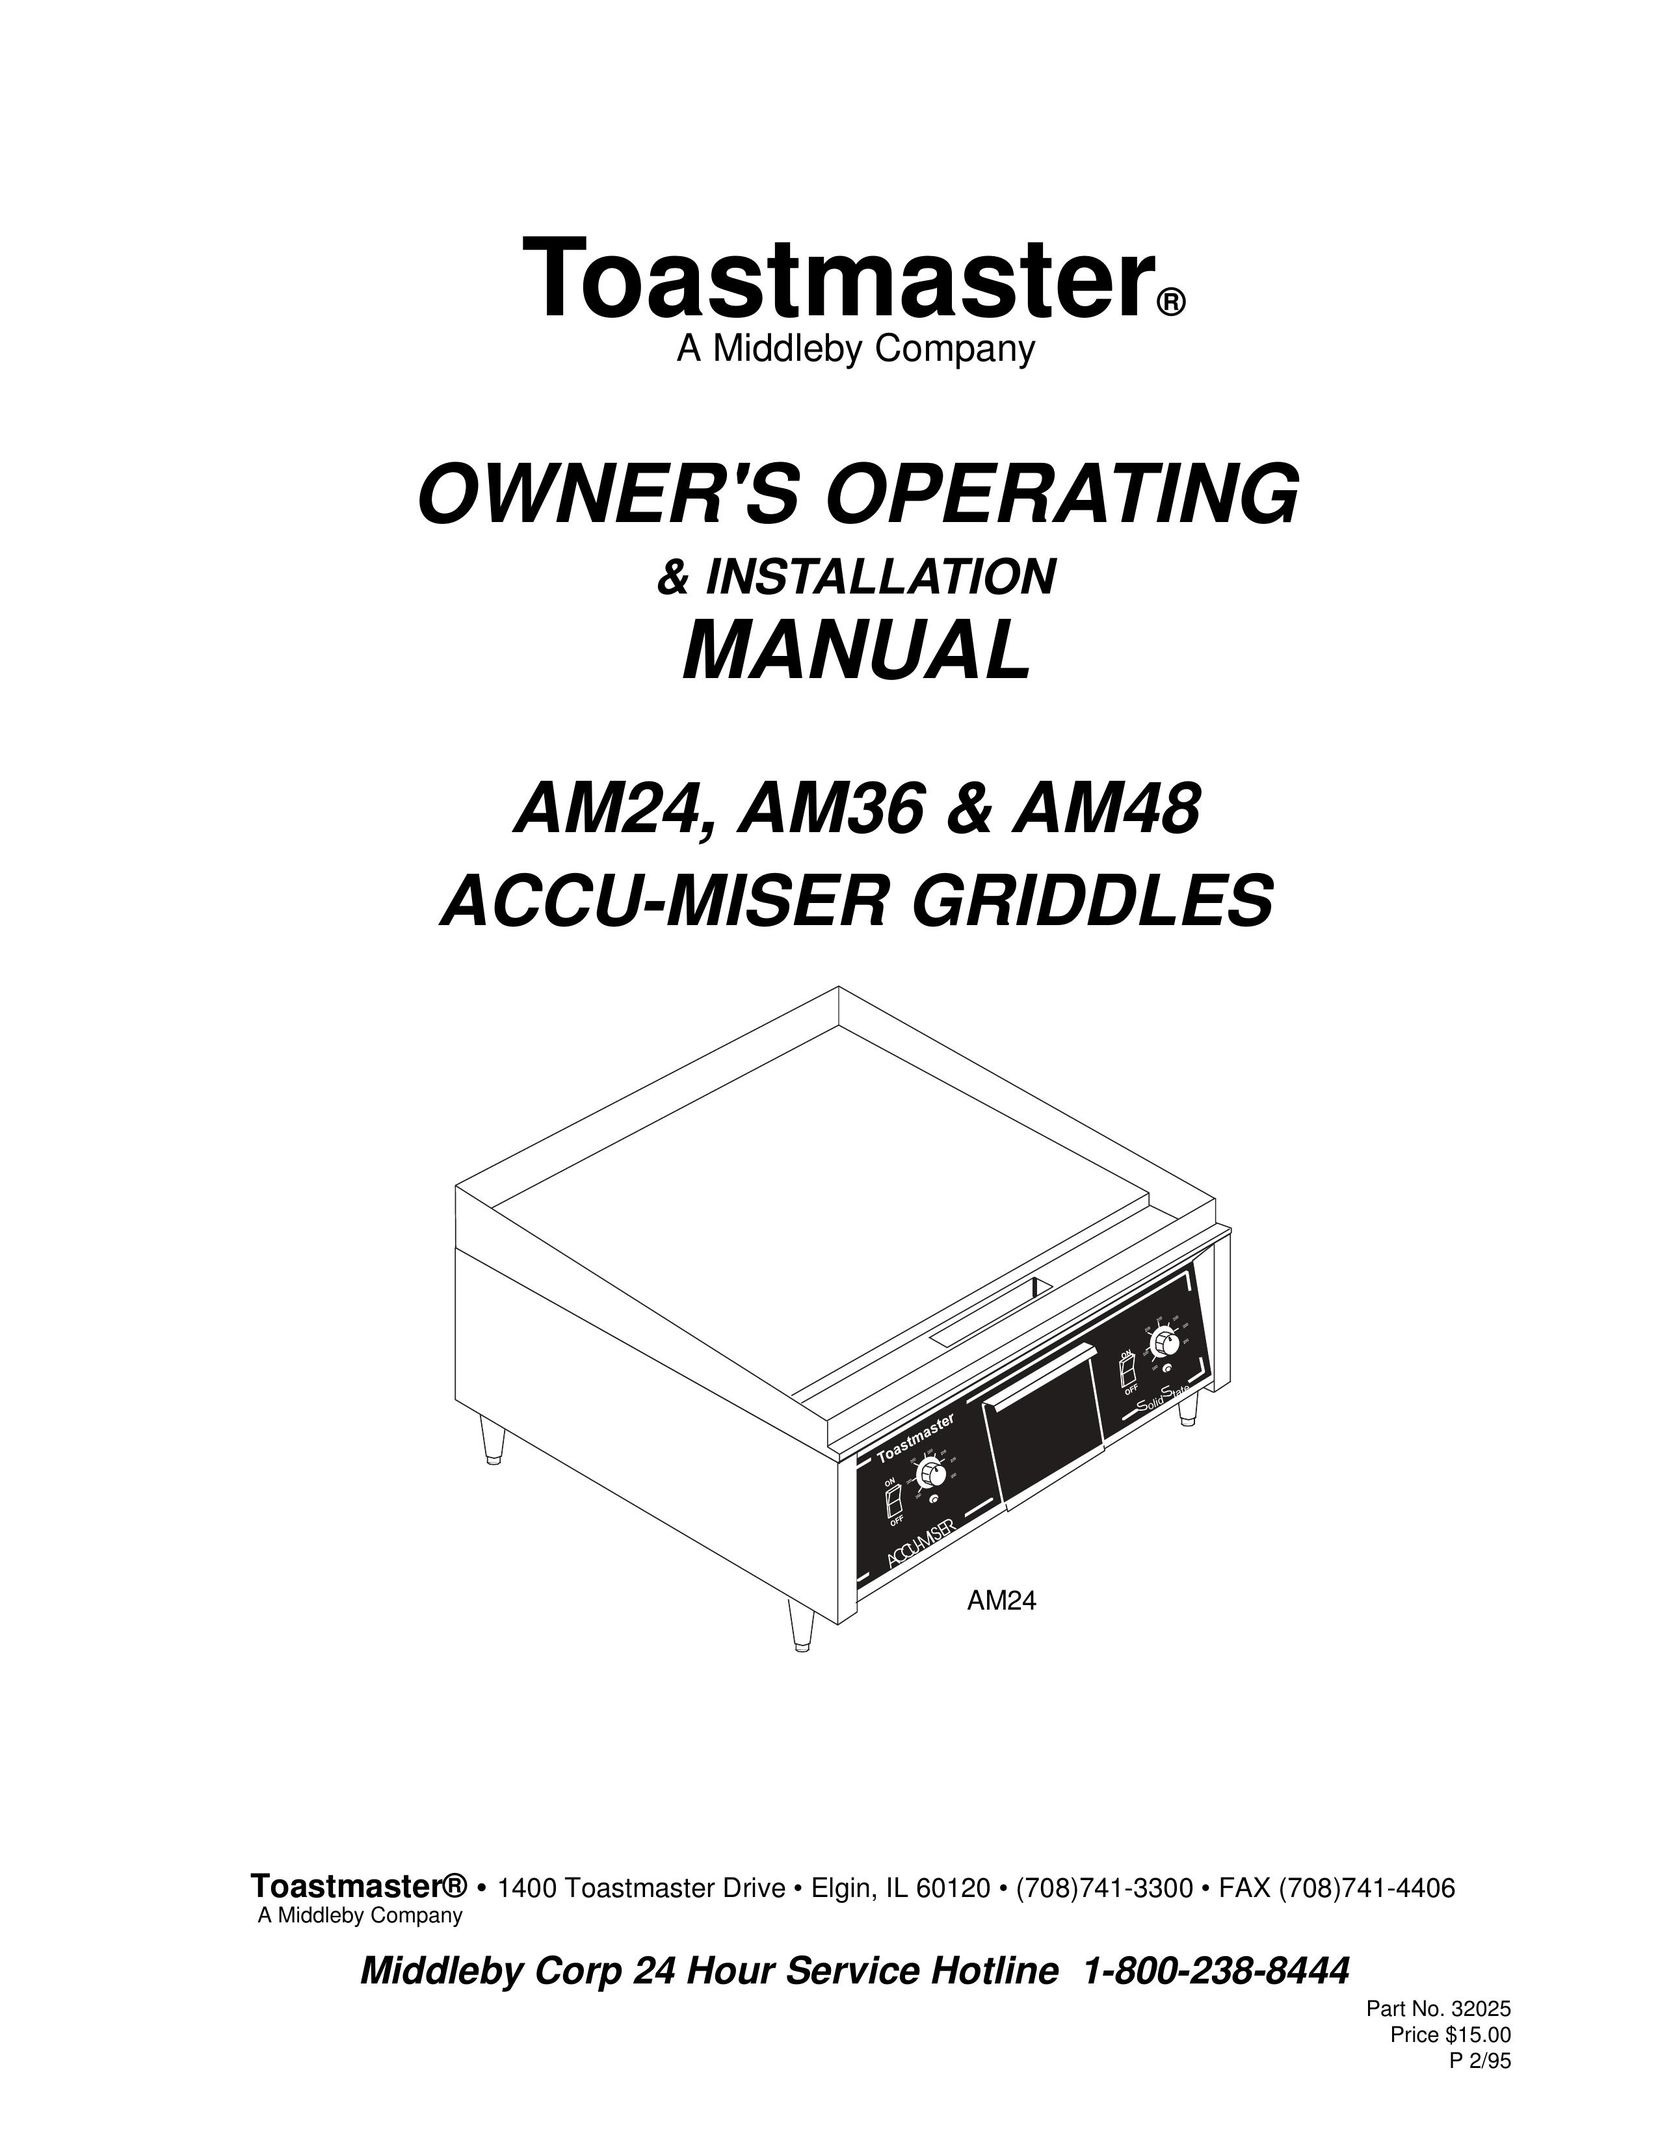 Toastmaster AM36 & AM48 Griddle User Manual